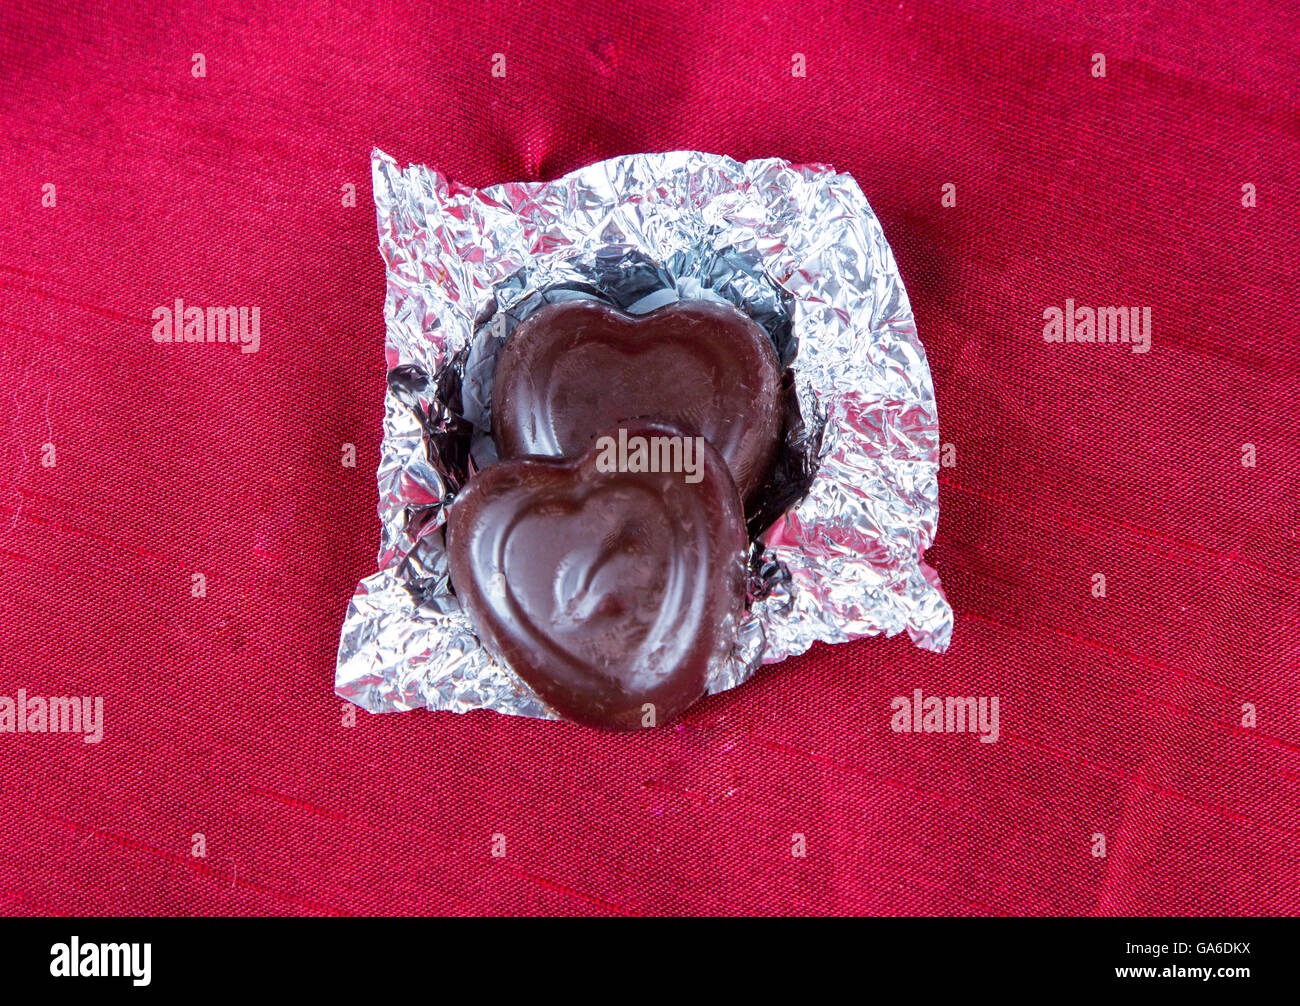 Heart shaped valentine's day chocolate candies on a red background. Stock Photo